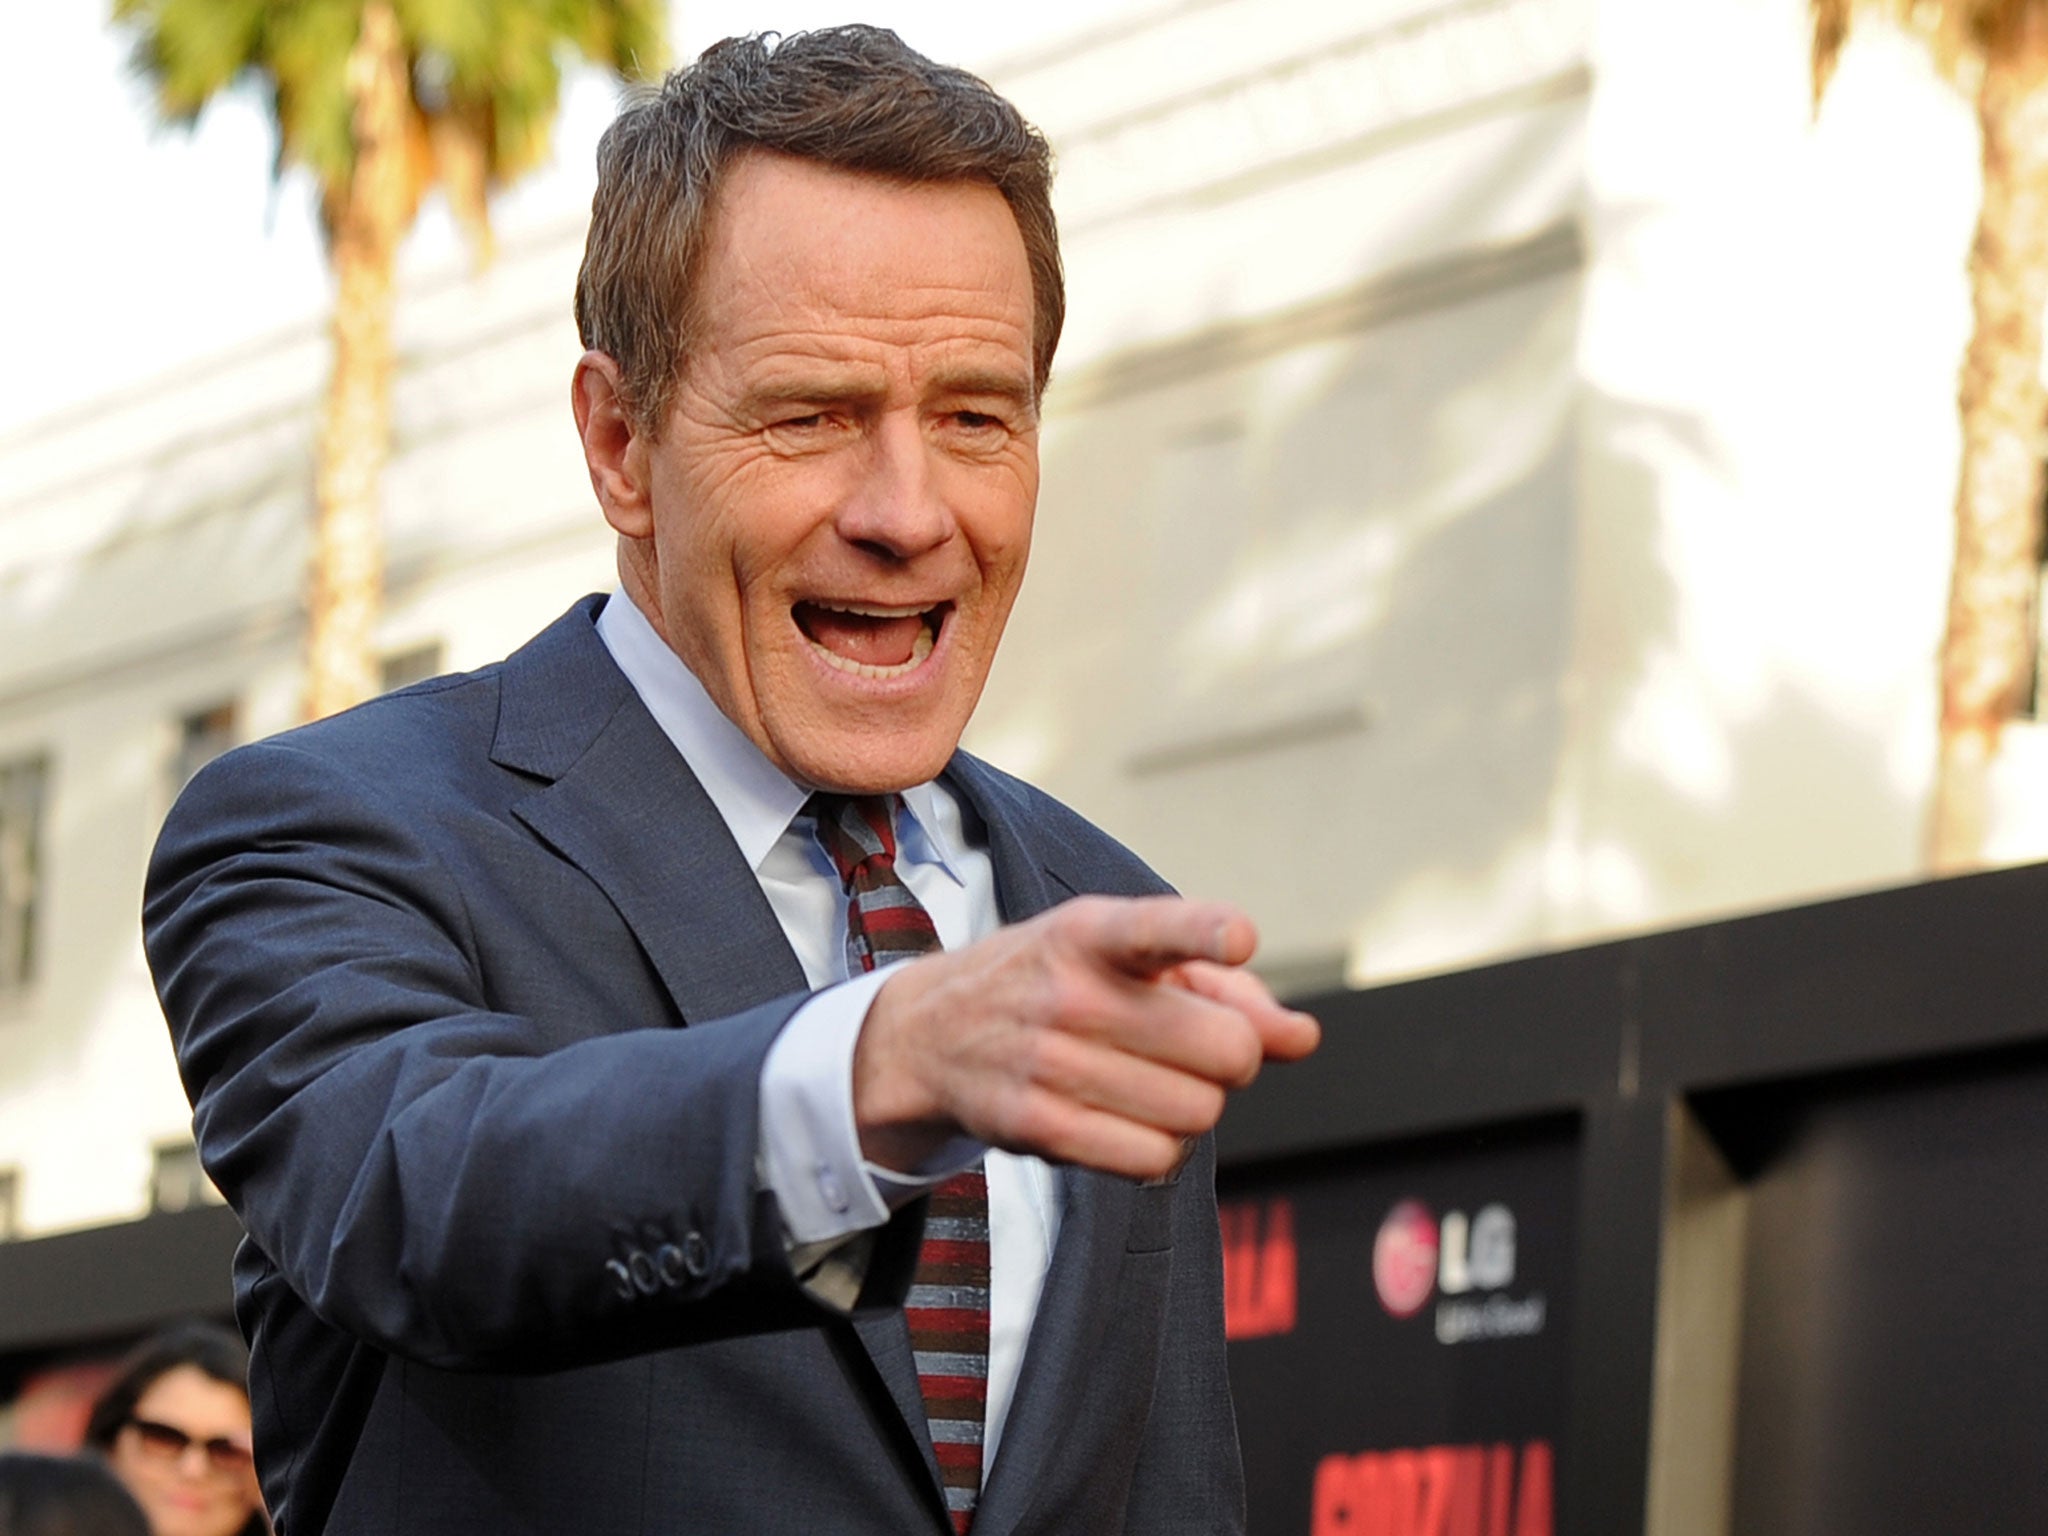 Breaking Bad's Bryan Cranston could soon be playing a Star Trek villain